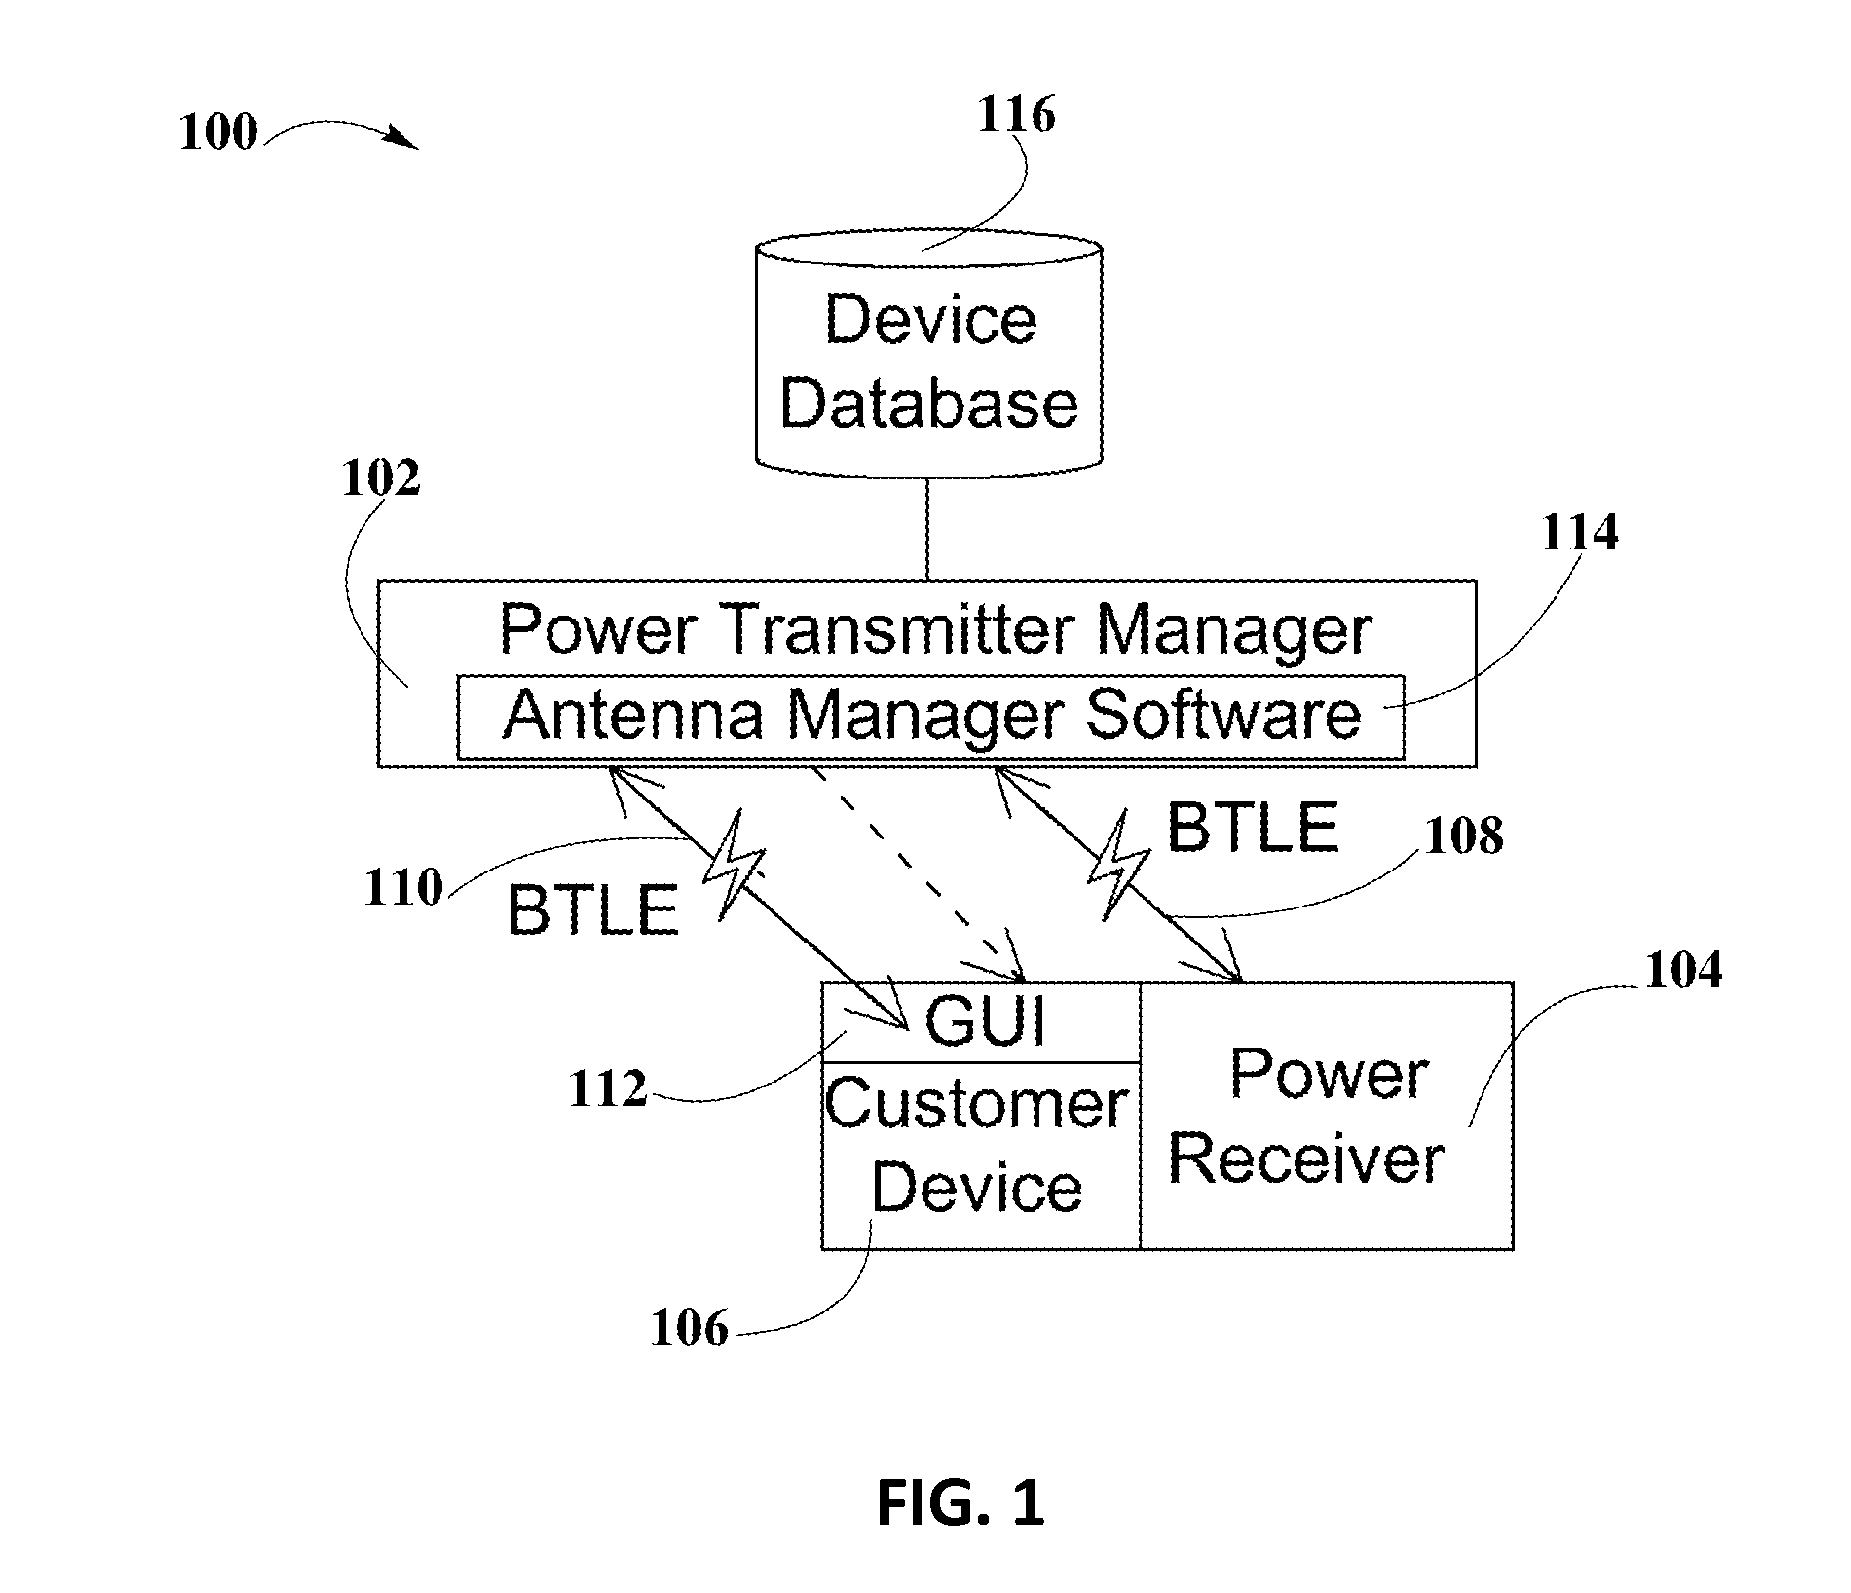 System and Method for Smart Registration of Wireless Power Receivers in a Wireless Power Network